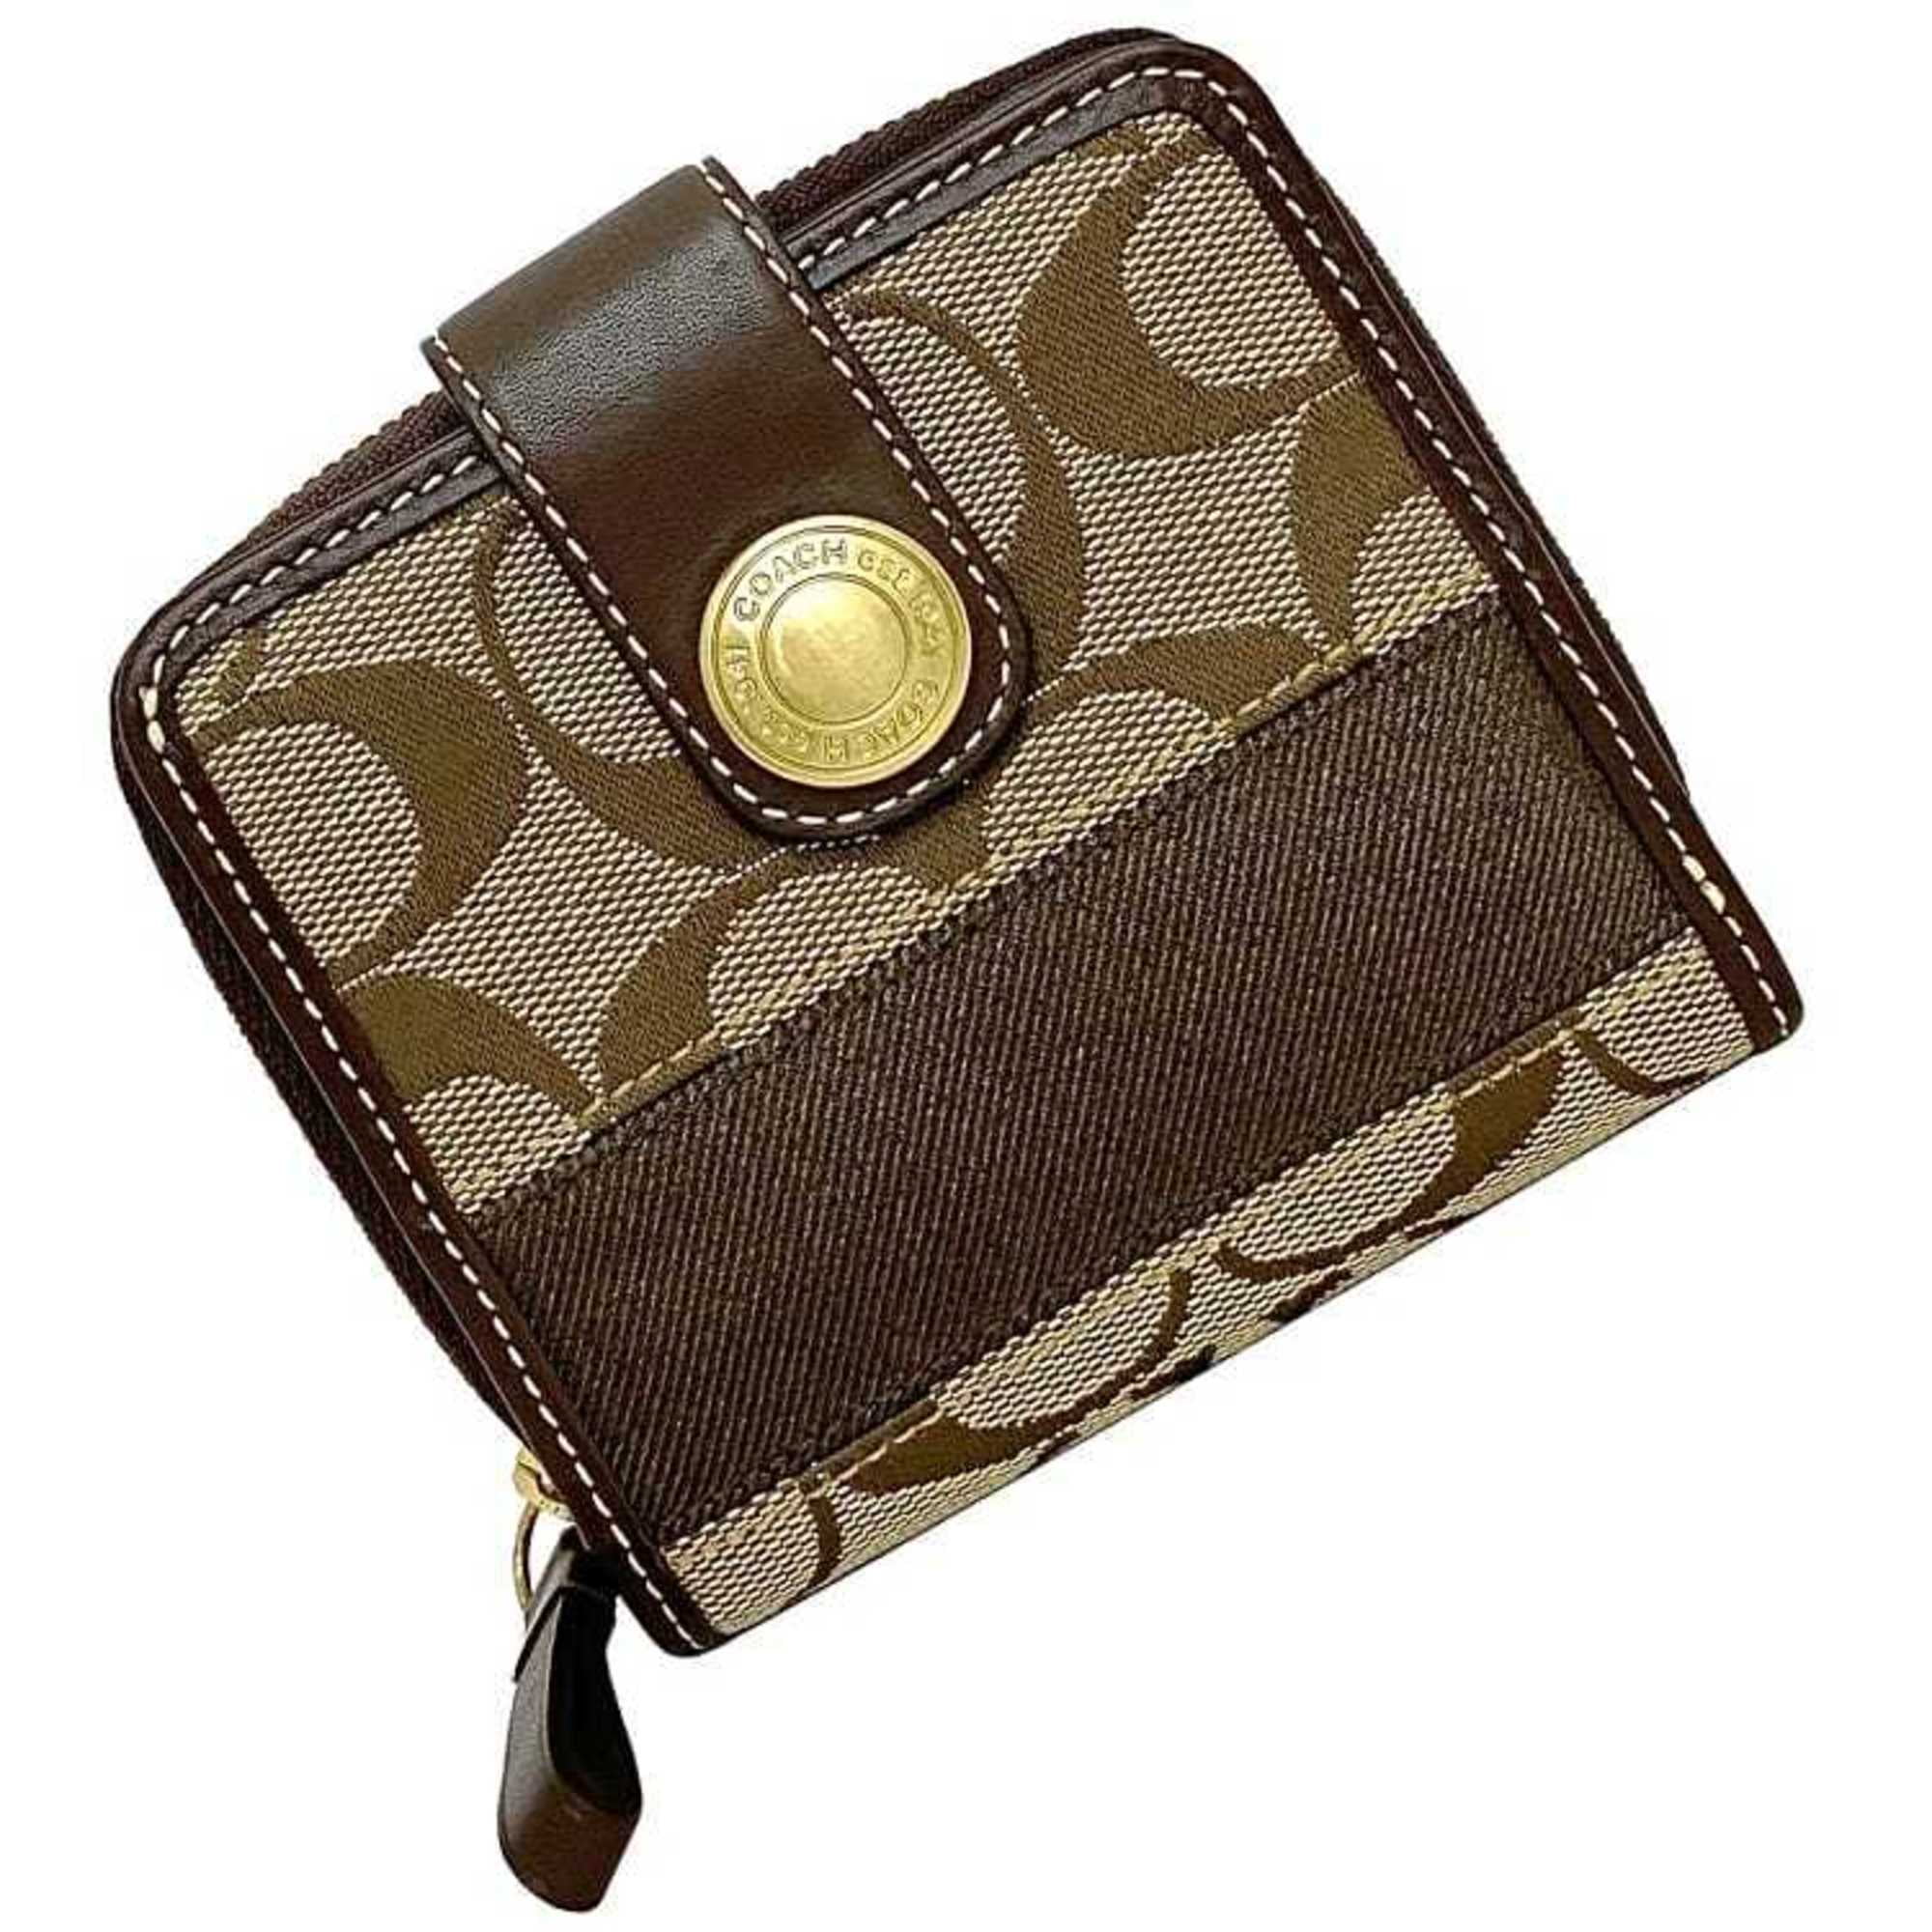 AUTH COACH BI-FOLD COMPACT LEATHER COIN & CARD HOLDER WALLET KEY RING  PREOWNED